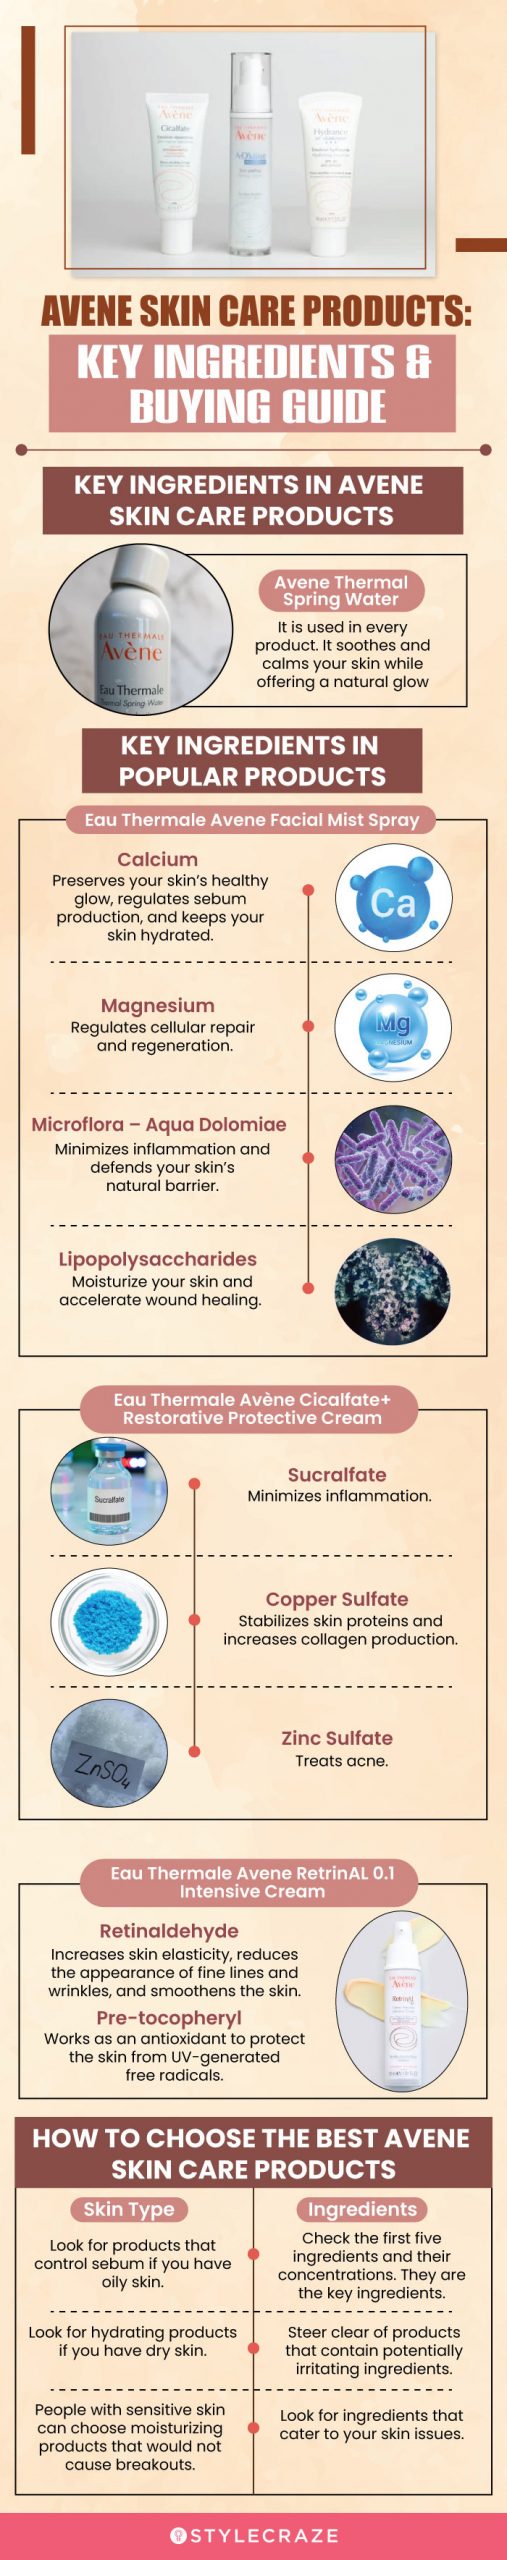 Avene Skin Care Products: Key Ingredients (infographic)